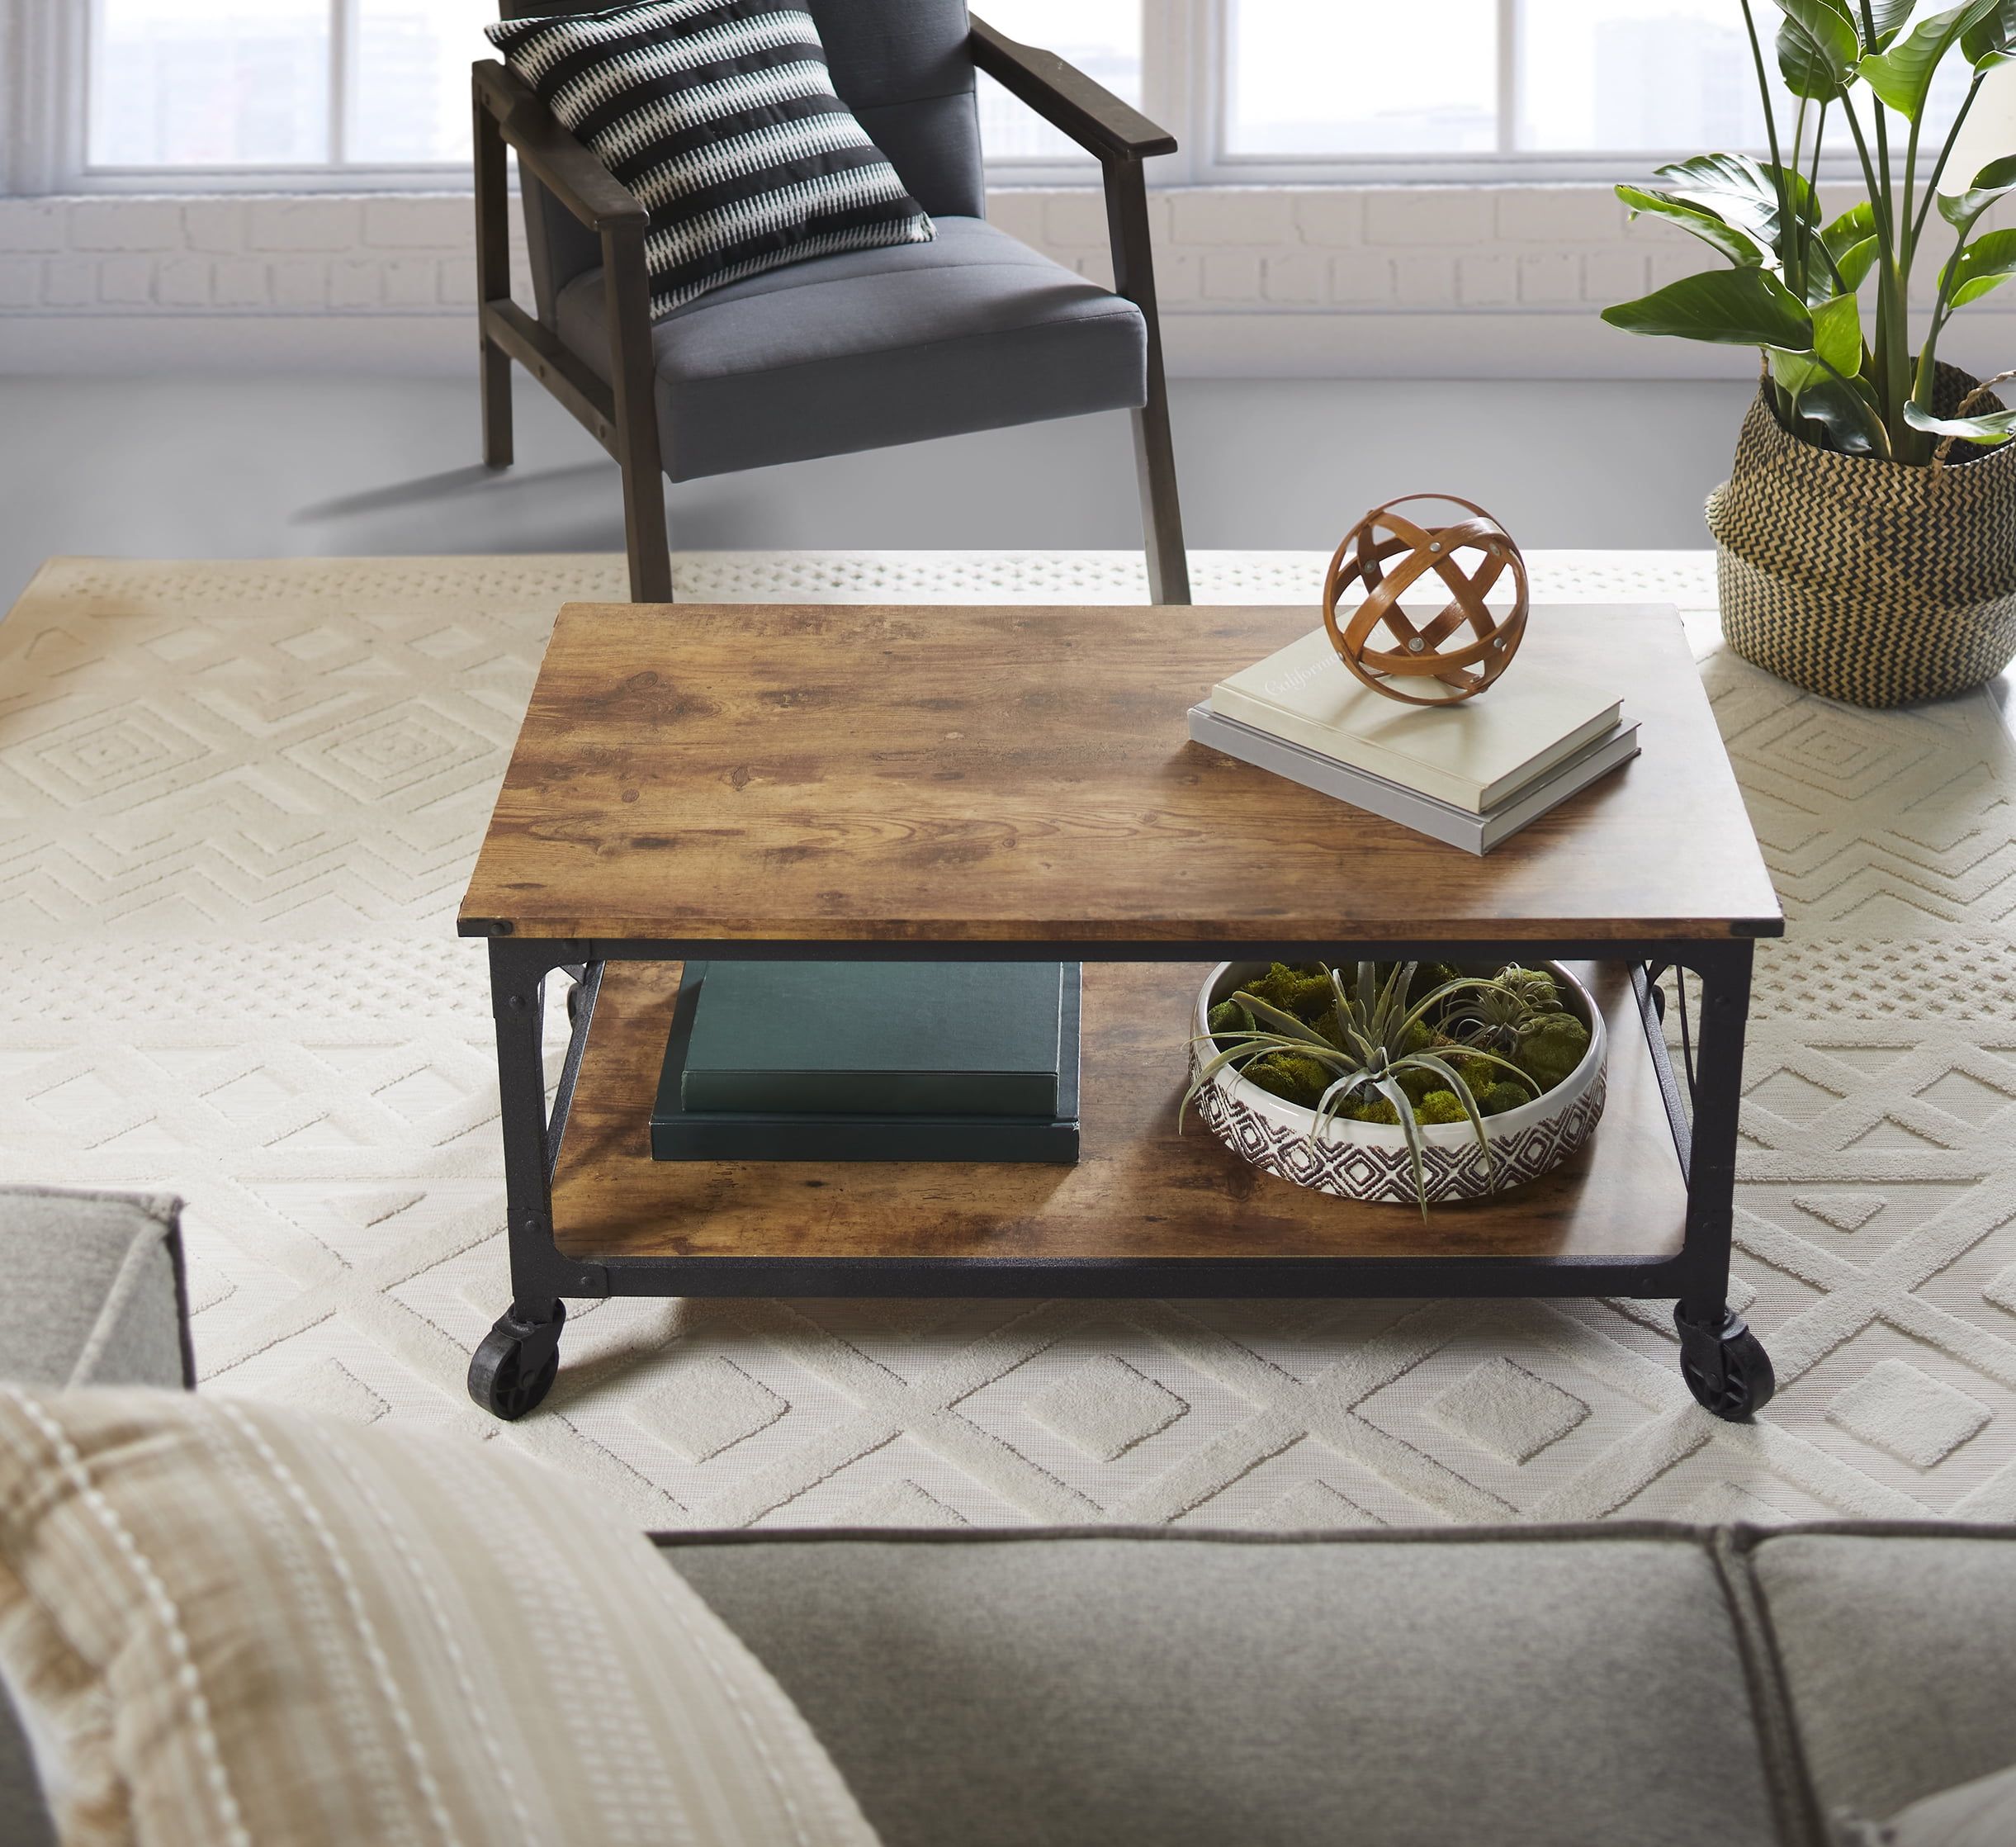 Rustic Country Coffee Table, Weathered Pine Finish – Walmart Intended For Brown Rustic Coffee Tables (View 16 of 20)